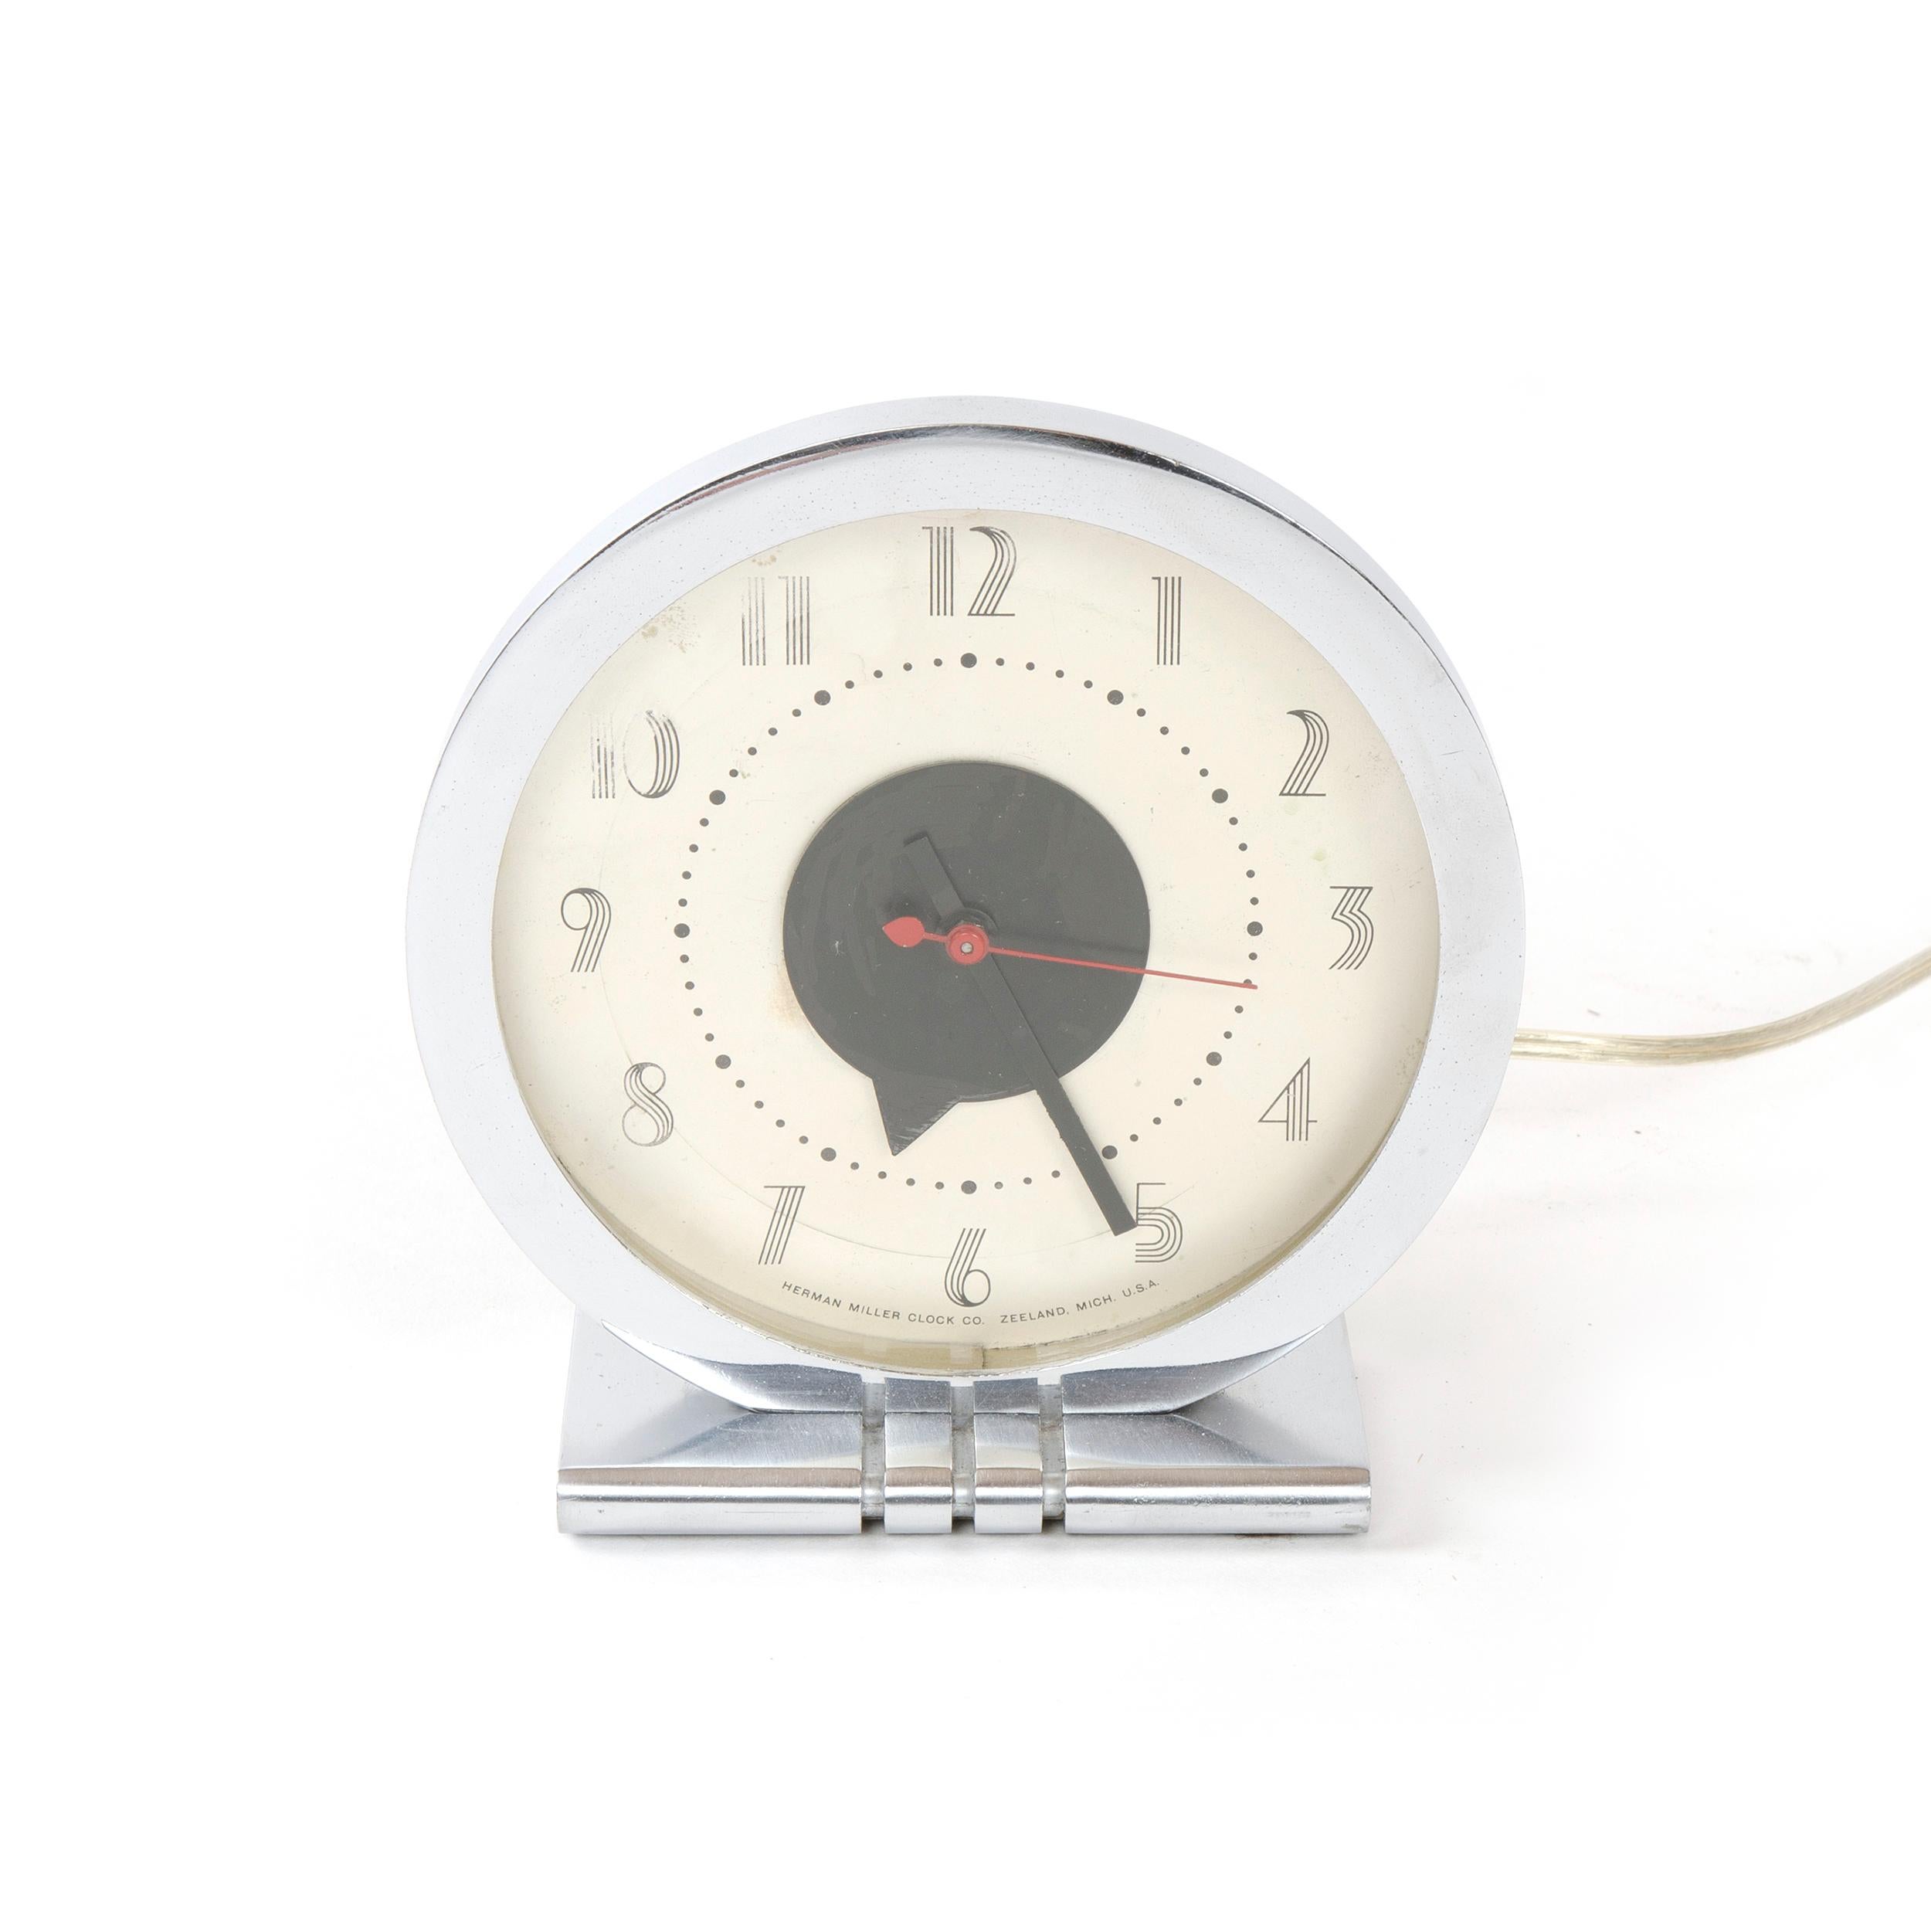 An electric chrome Art Deco clock with an ivory face and a red sweeping second hand.